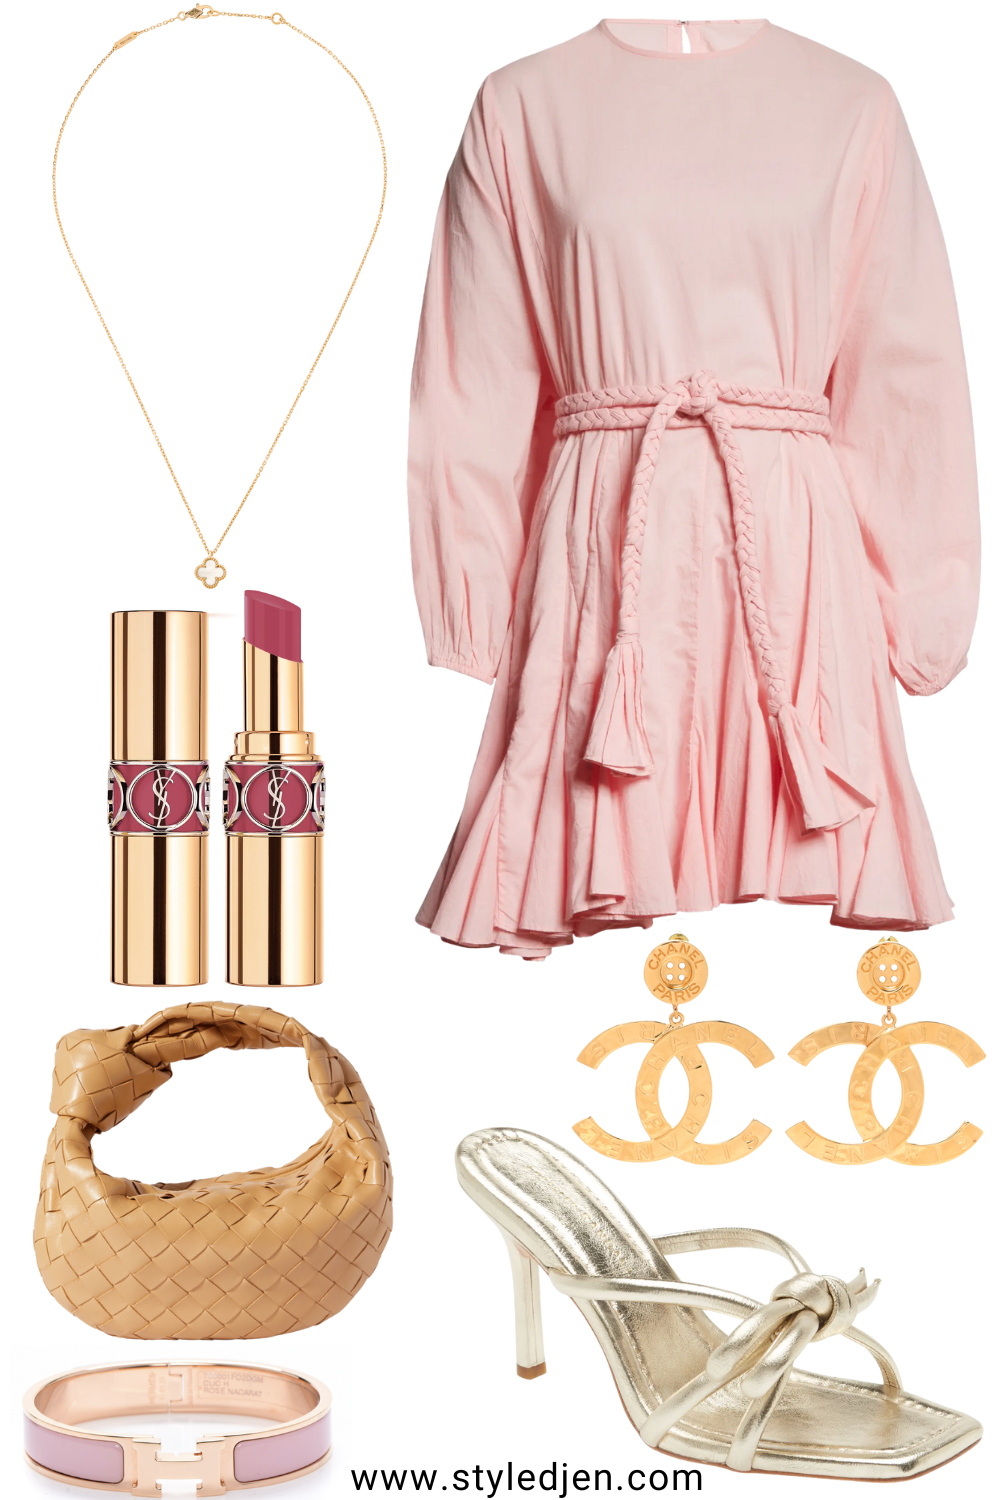 Rhode ella dress candy pink with loeffler randall bow heels and chanel earrings